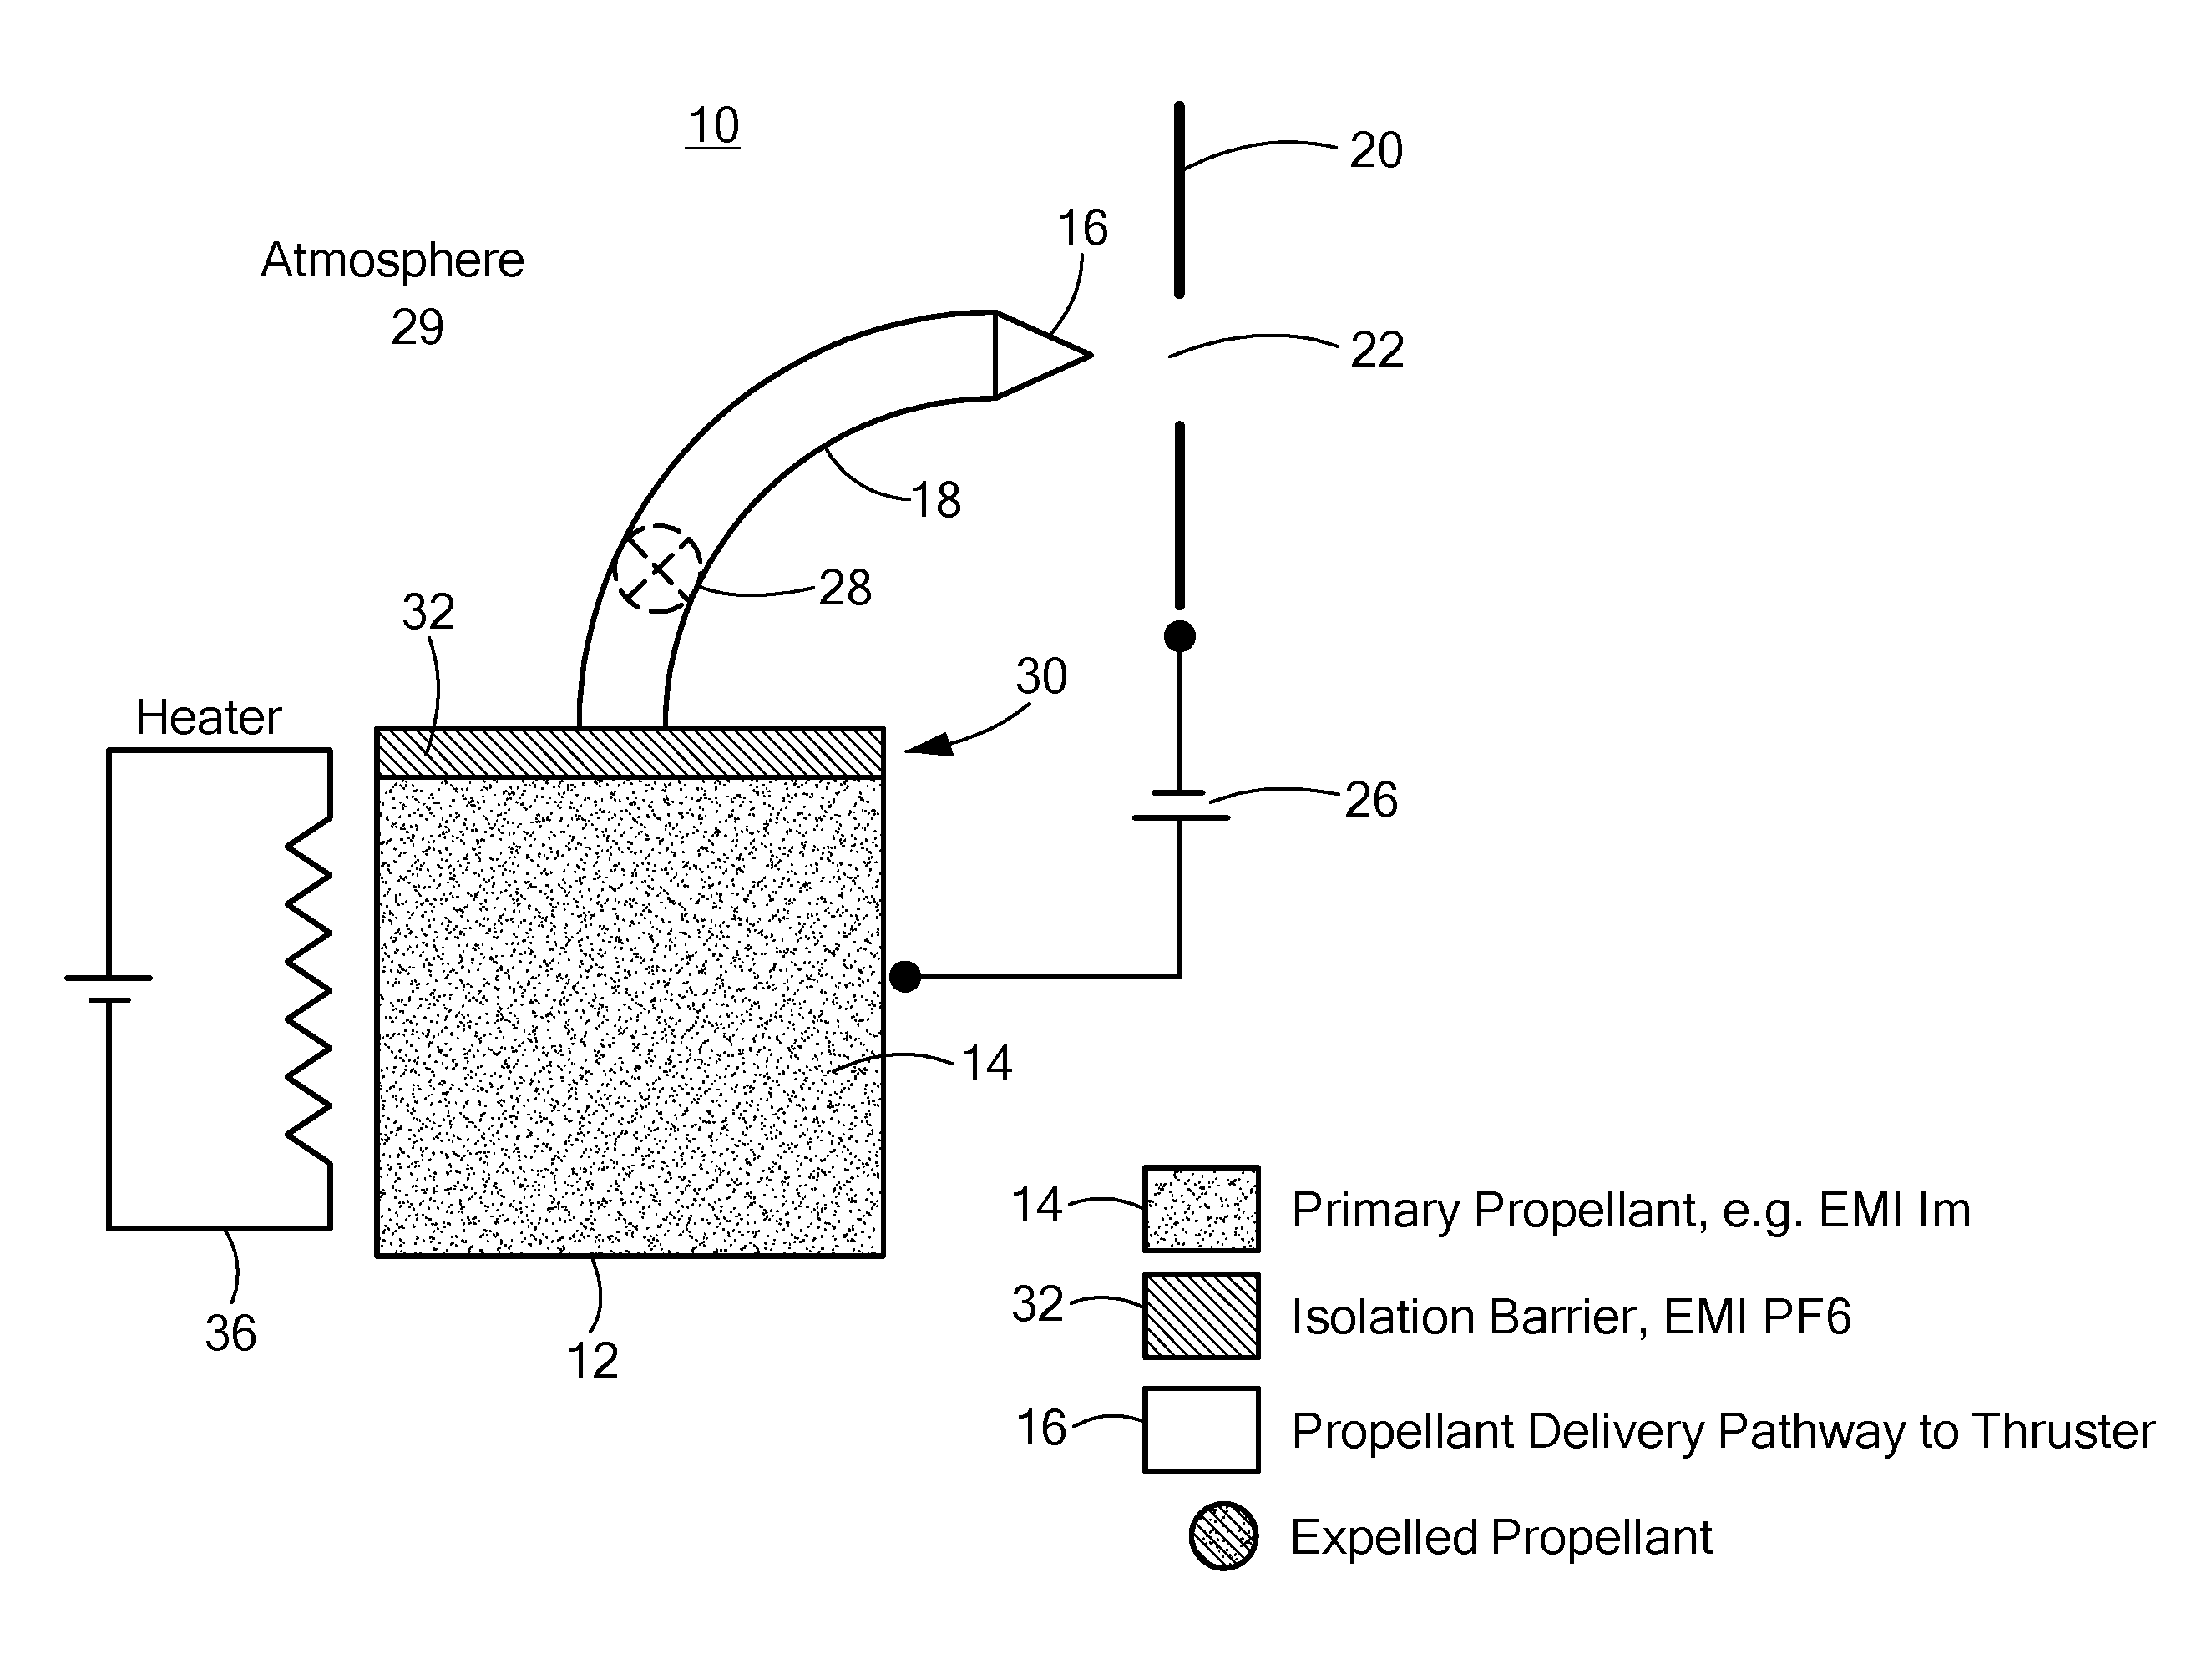 Propellant isolation barrier